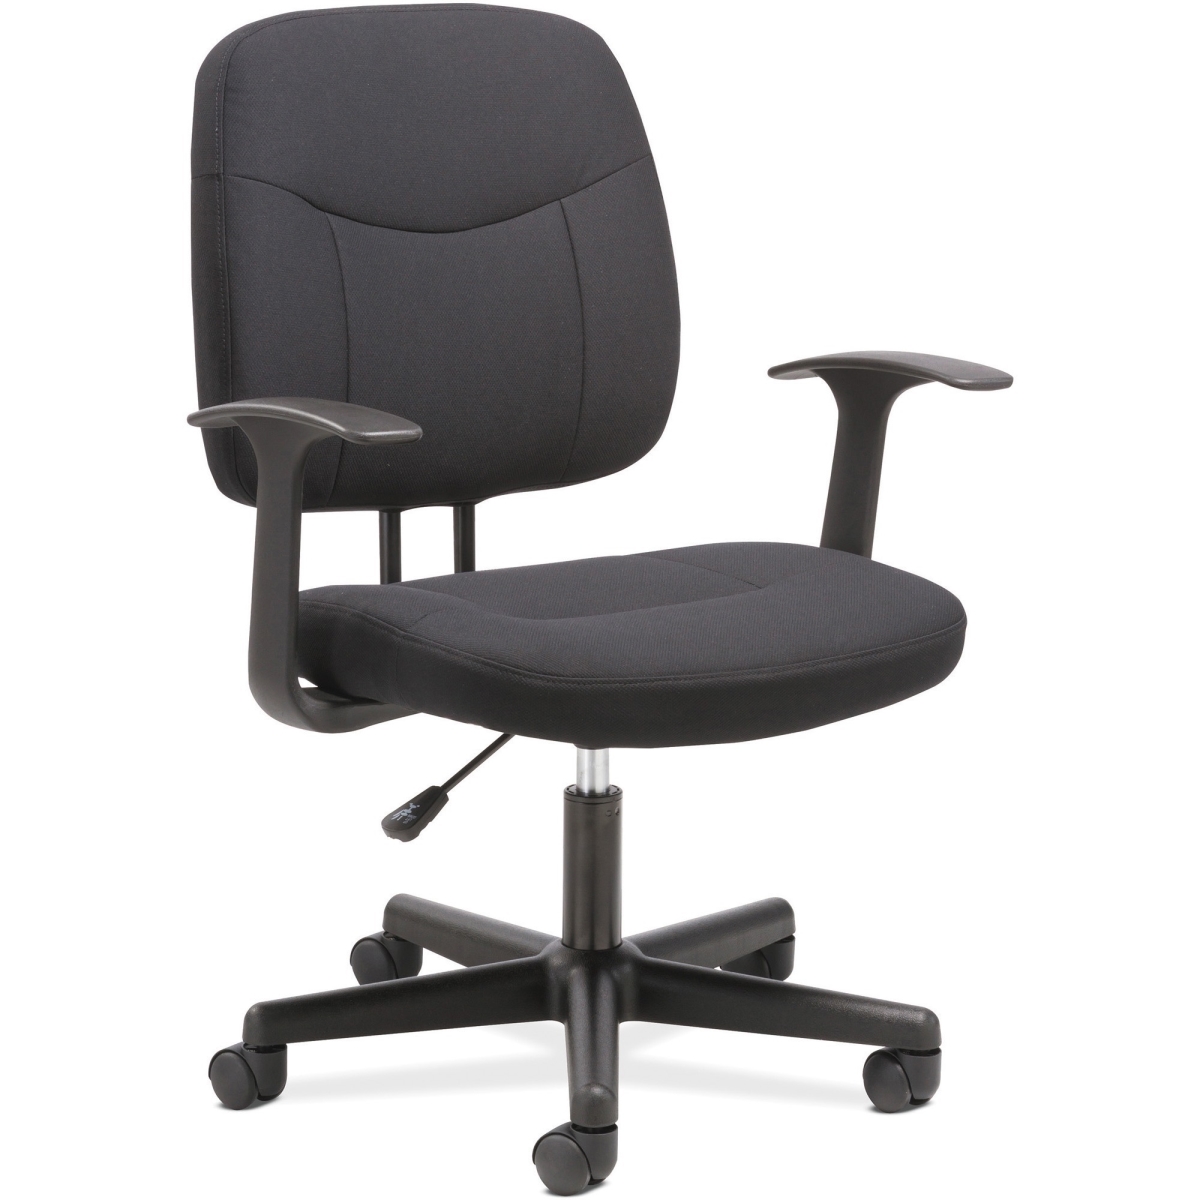 Bsxvst402 Sadie Seating Fixed Arms Fabric Task Chair, Black